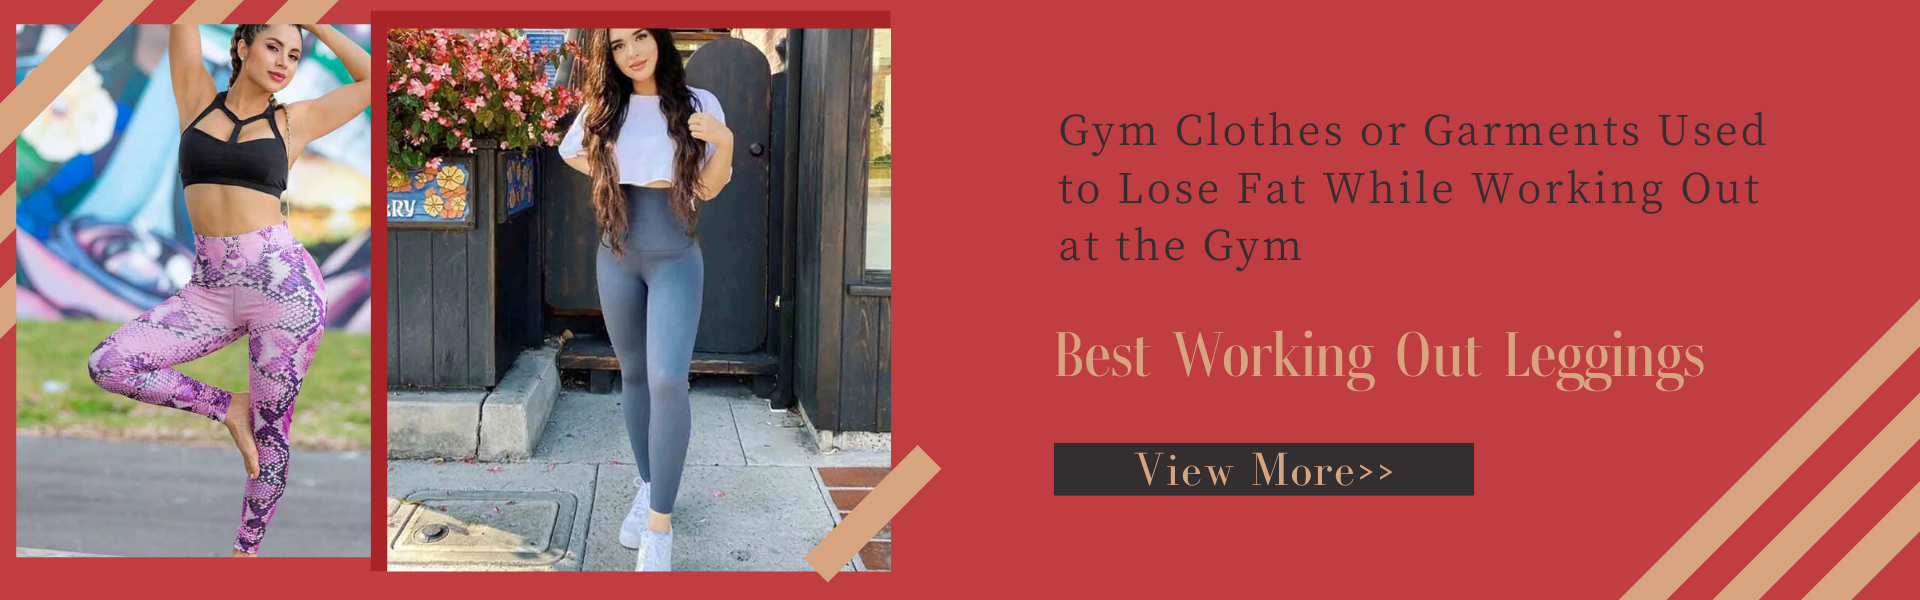 Gym Clothes or Garments Used to Lose Fat While Working Out at the Gym